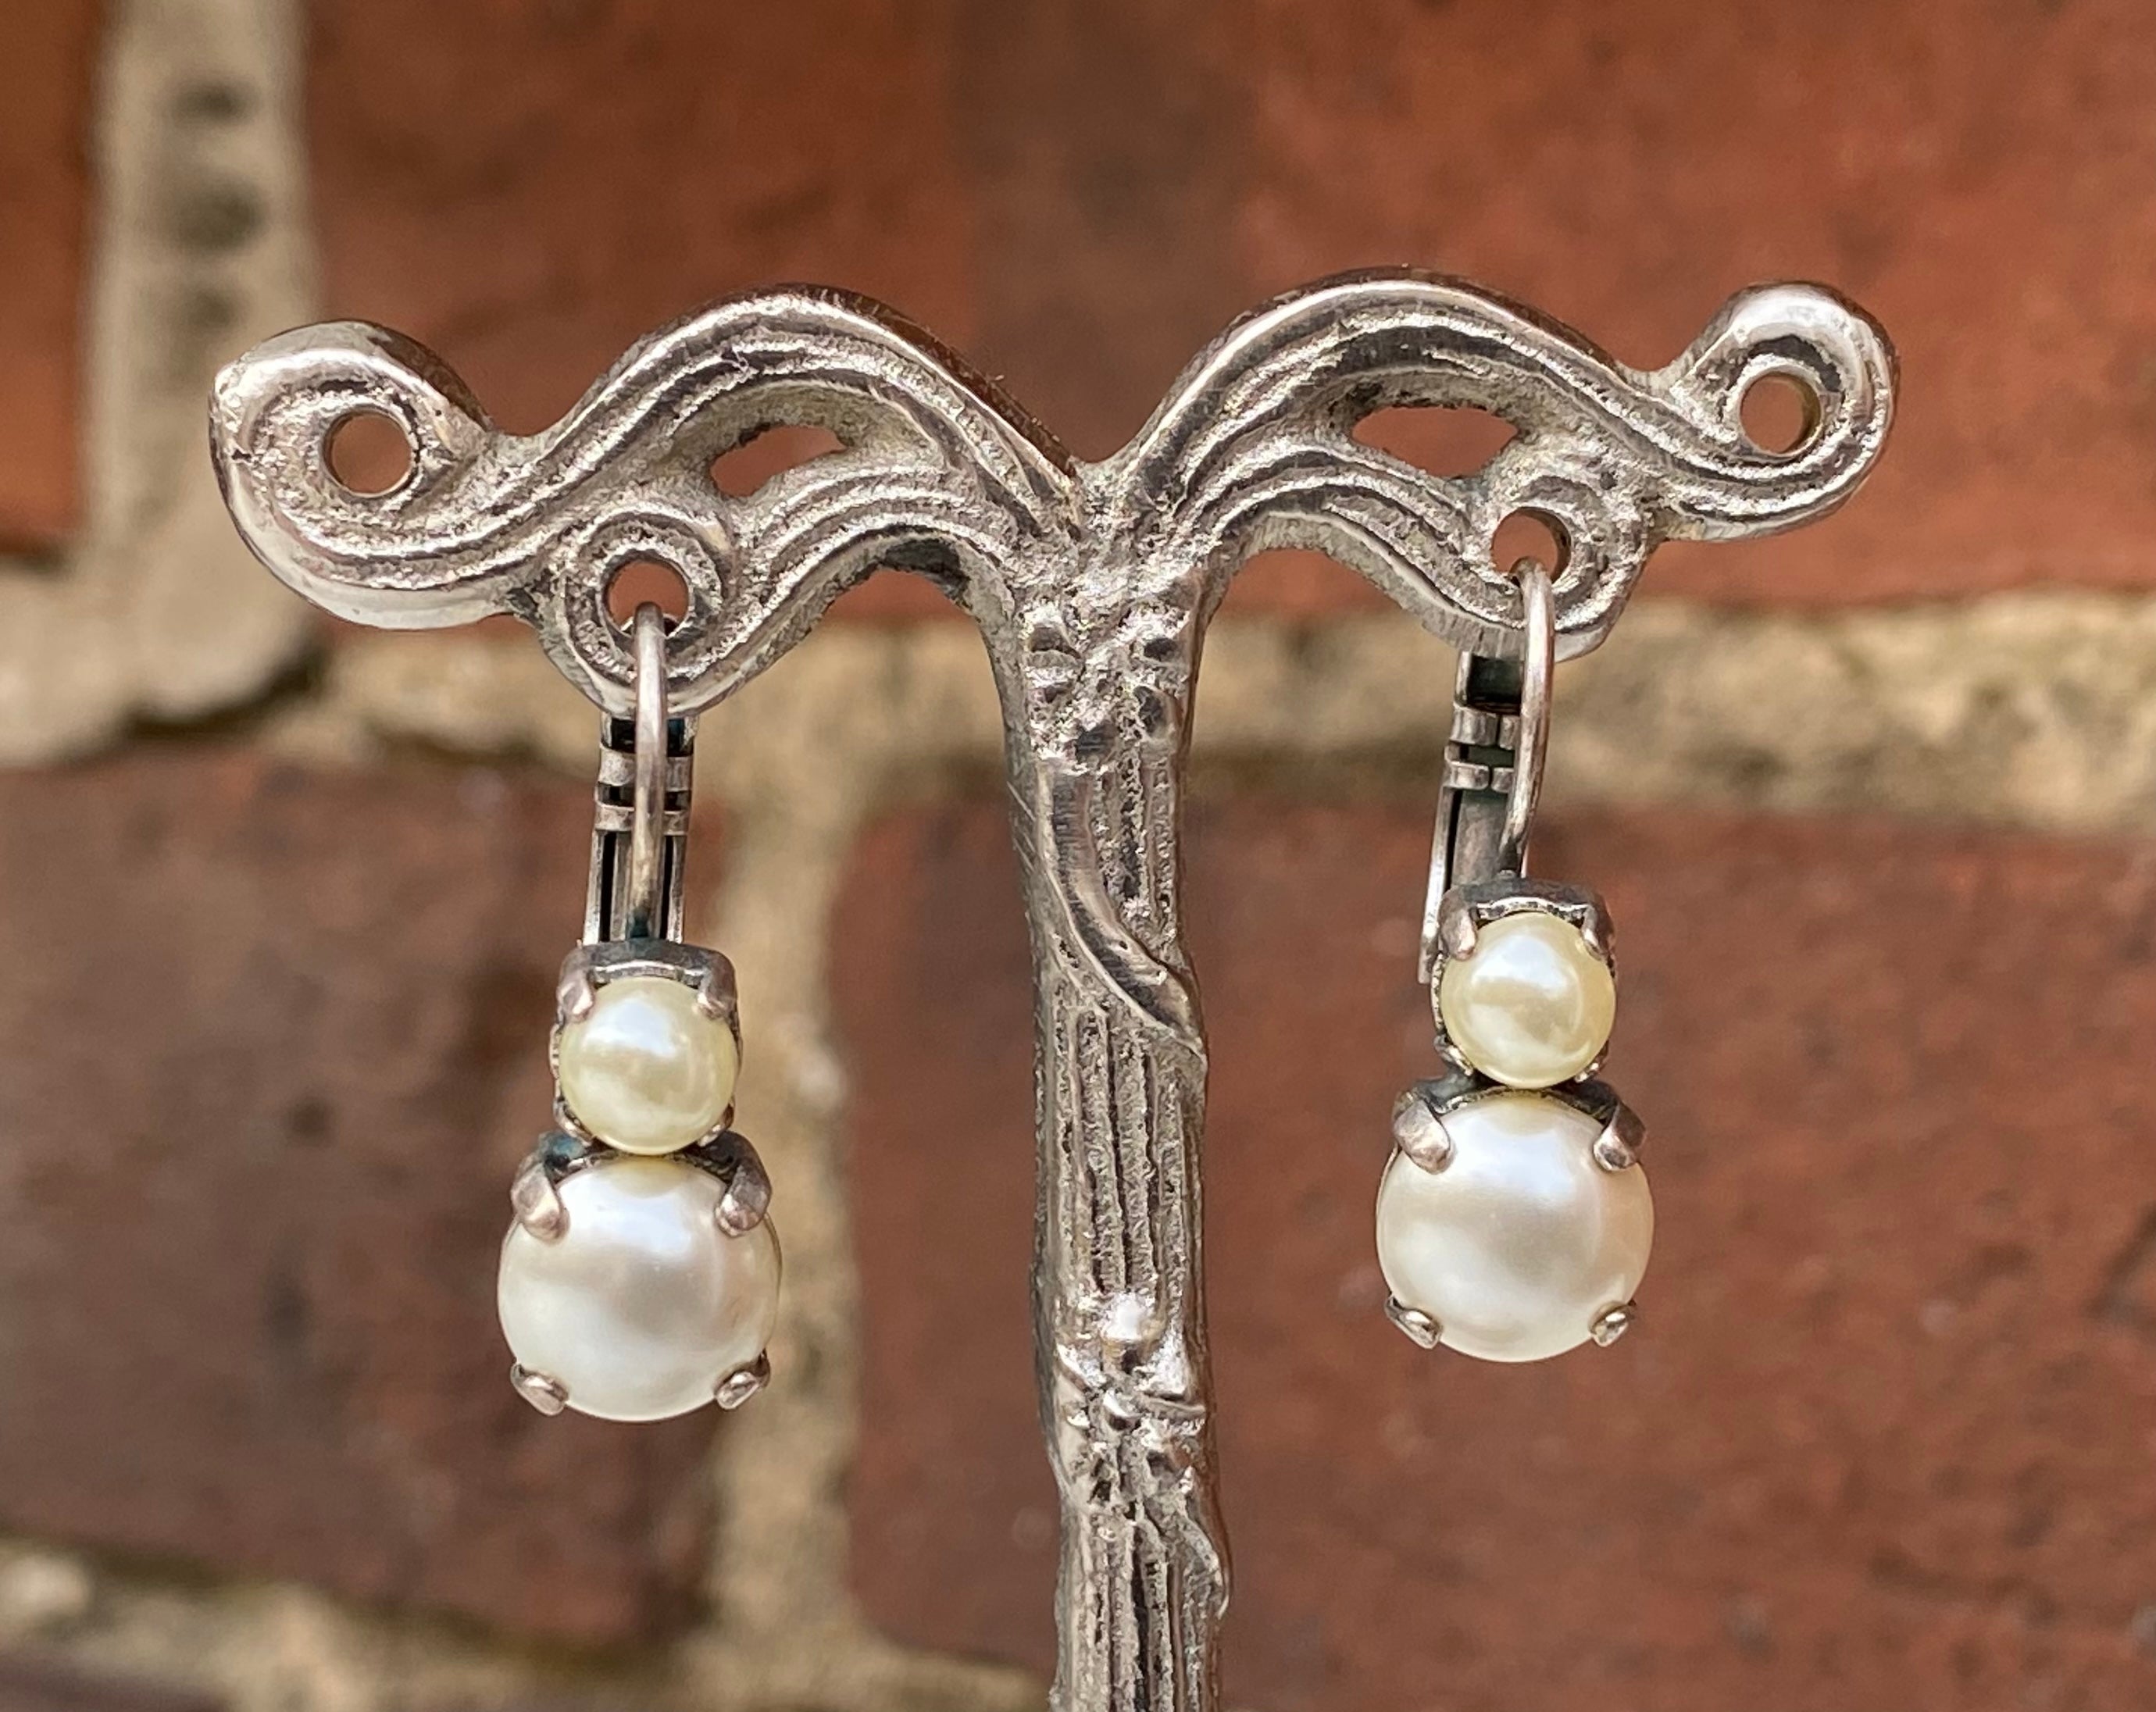 Mariana Antique Silver Must-Have Double Stone Crystal Leverback Earrings in “Cream Pearl”